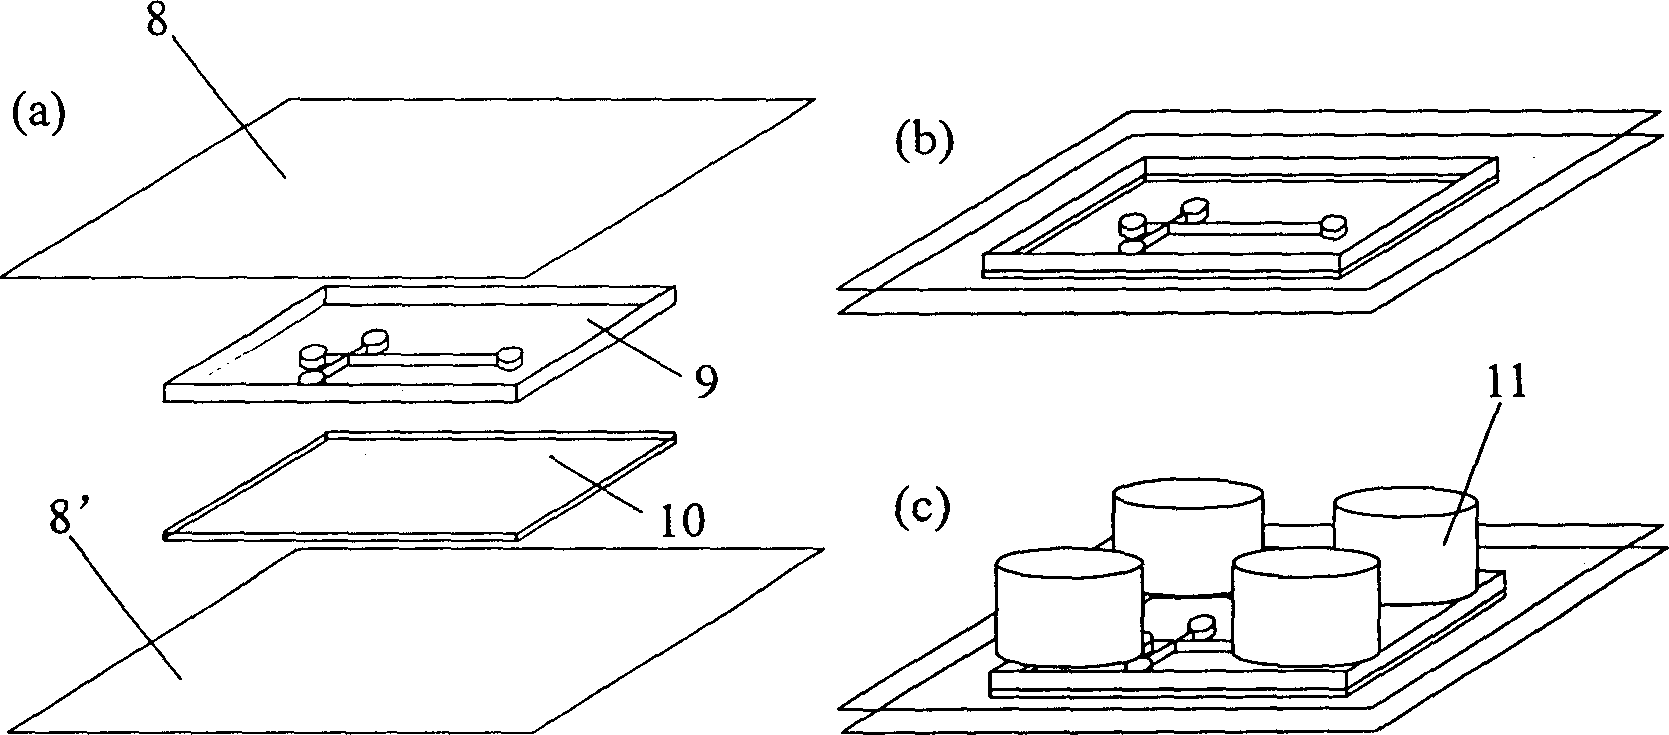 Assistant hot-pressed packing method for polymethylmethacrylate microflow controlled chip solvent